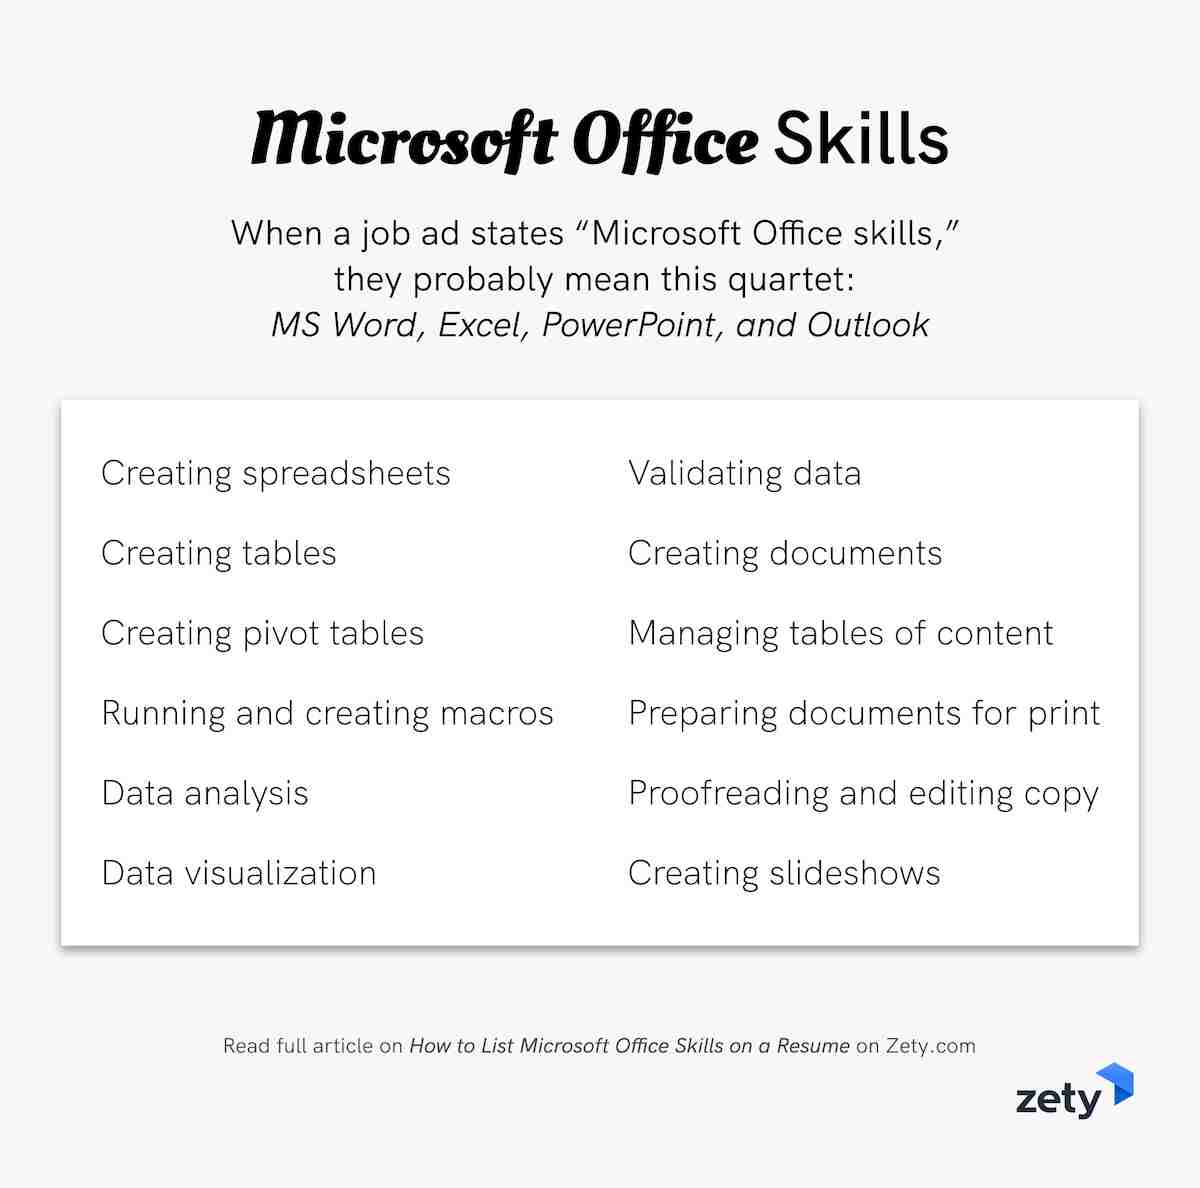 What Do You Call Microsoft Office Skills